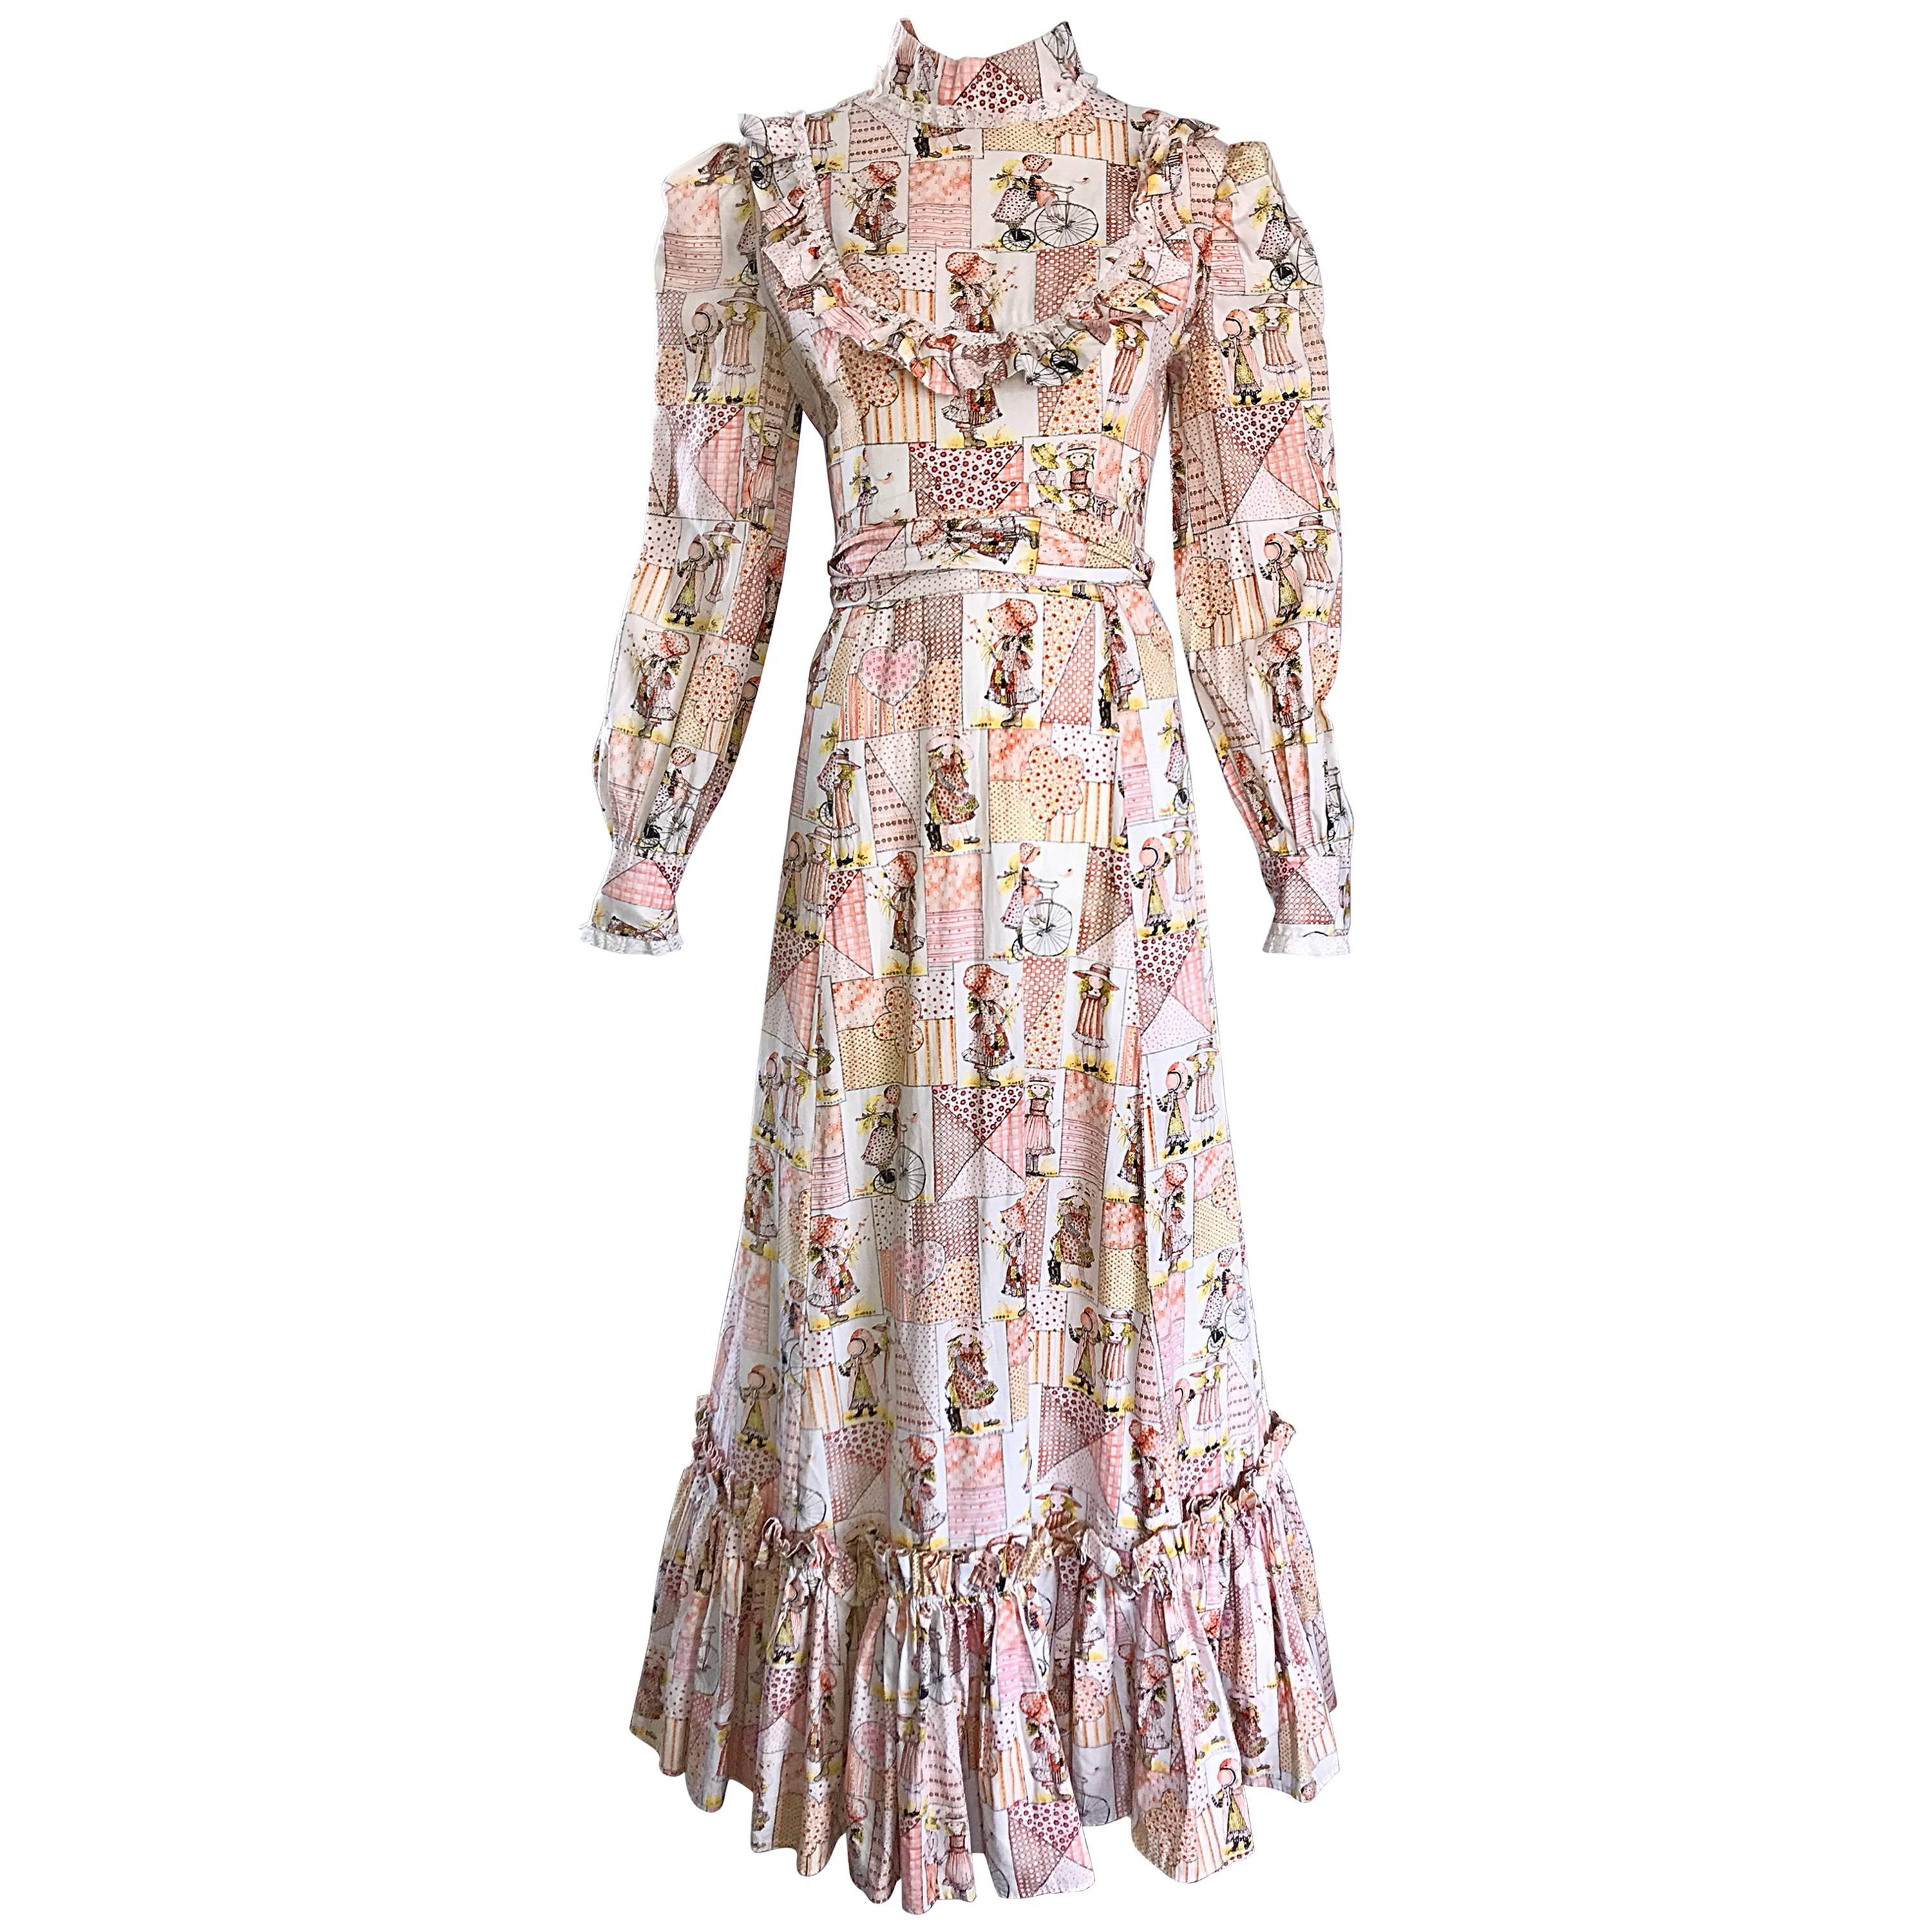 1970s Holly Hobbie Novelty Print Victorian Inspired Cotton Vintage Maxi Dress